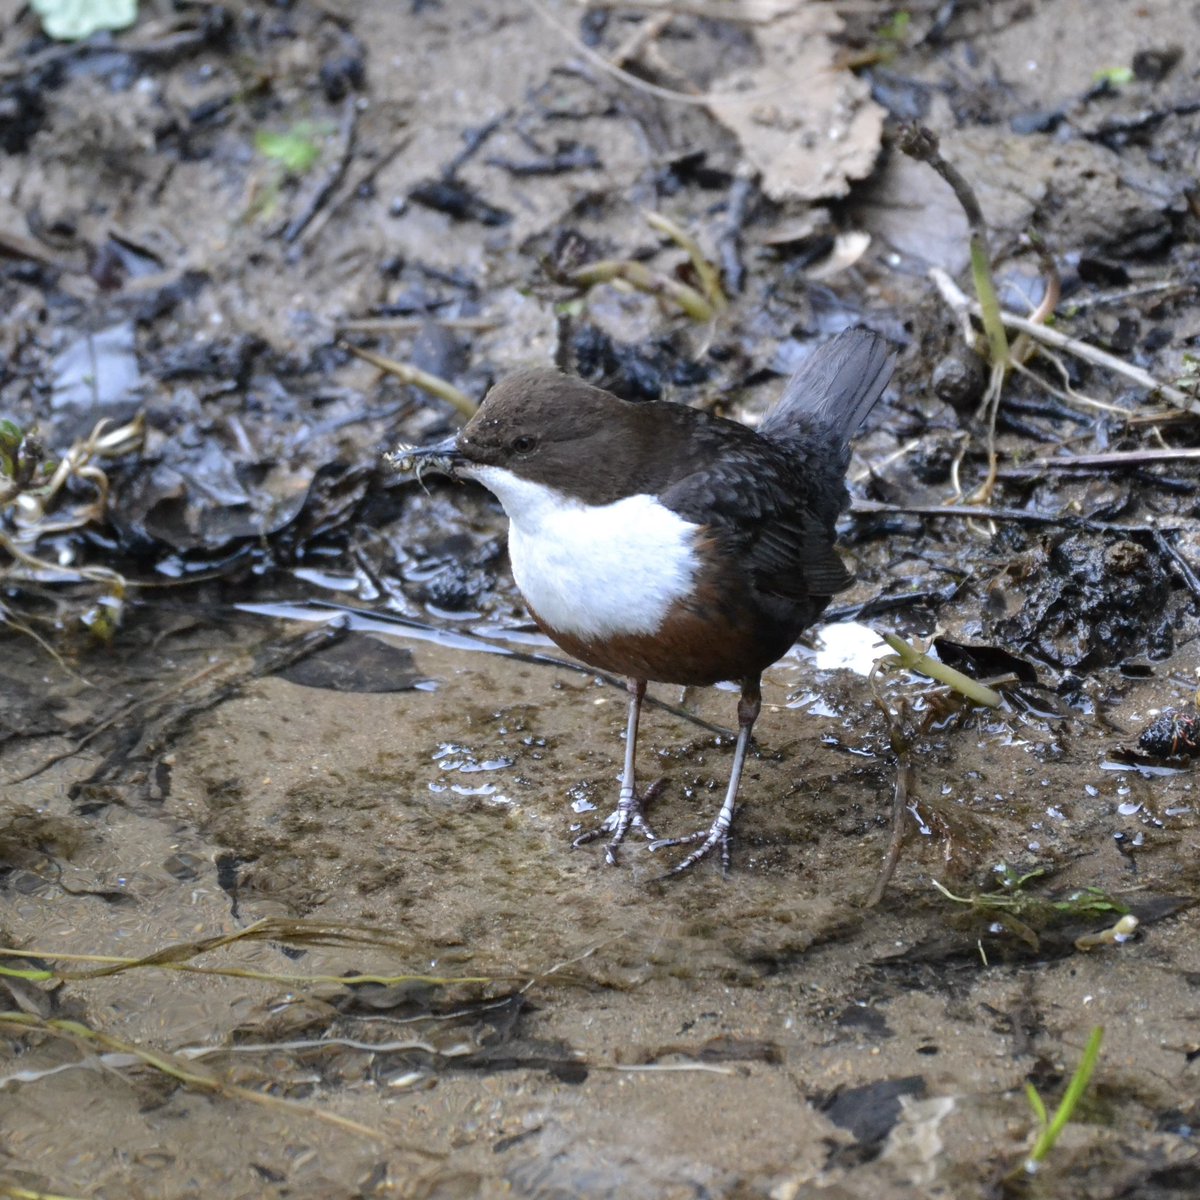 The Dippers have made a nest nearby 😍 ssssh! Secret location on the #DerbyshireWye #WildlifeWednesday